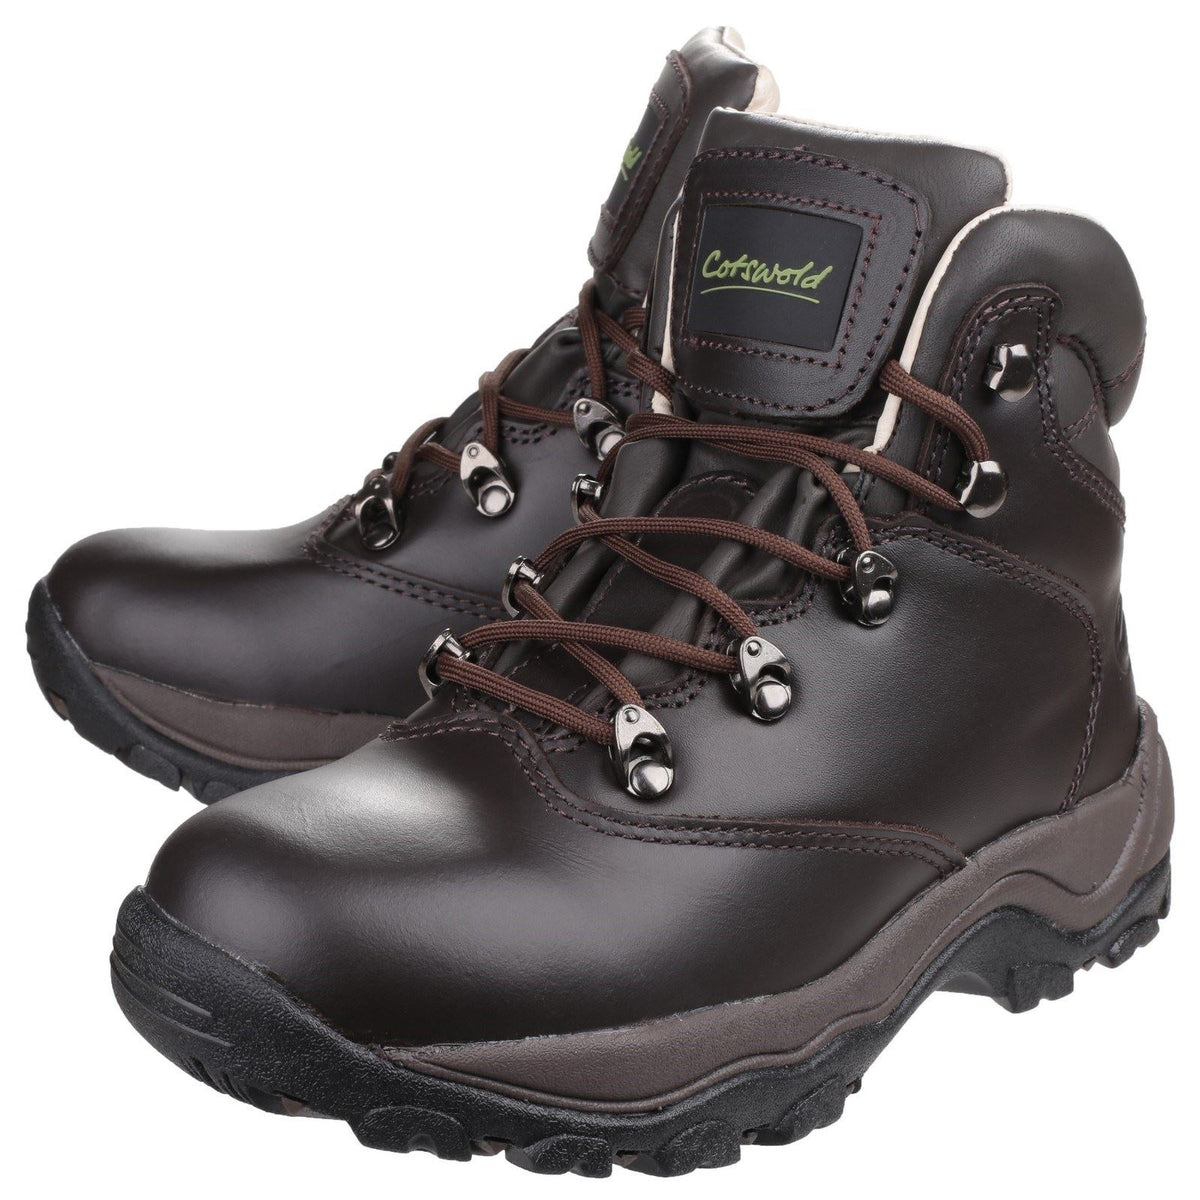 Cotswold Winstone Boots